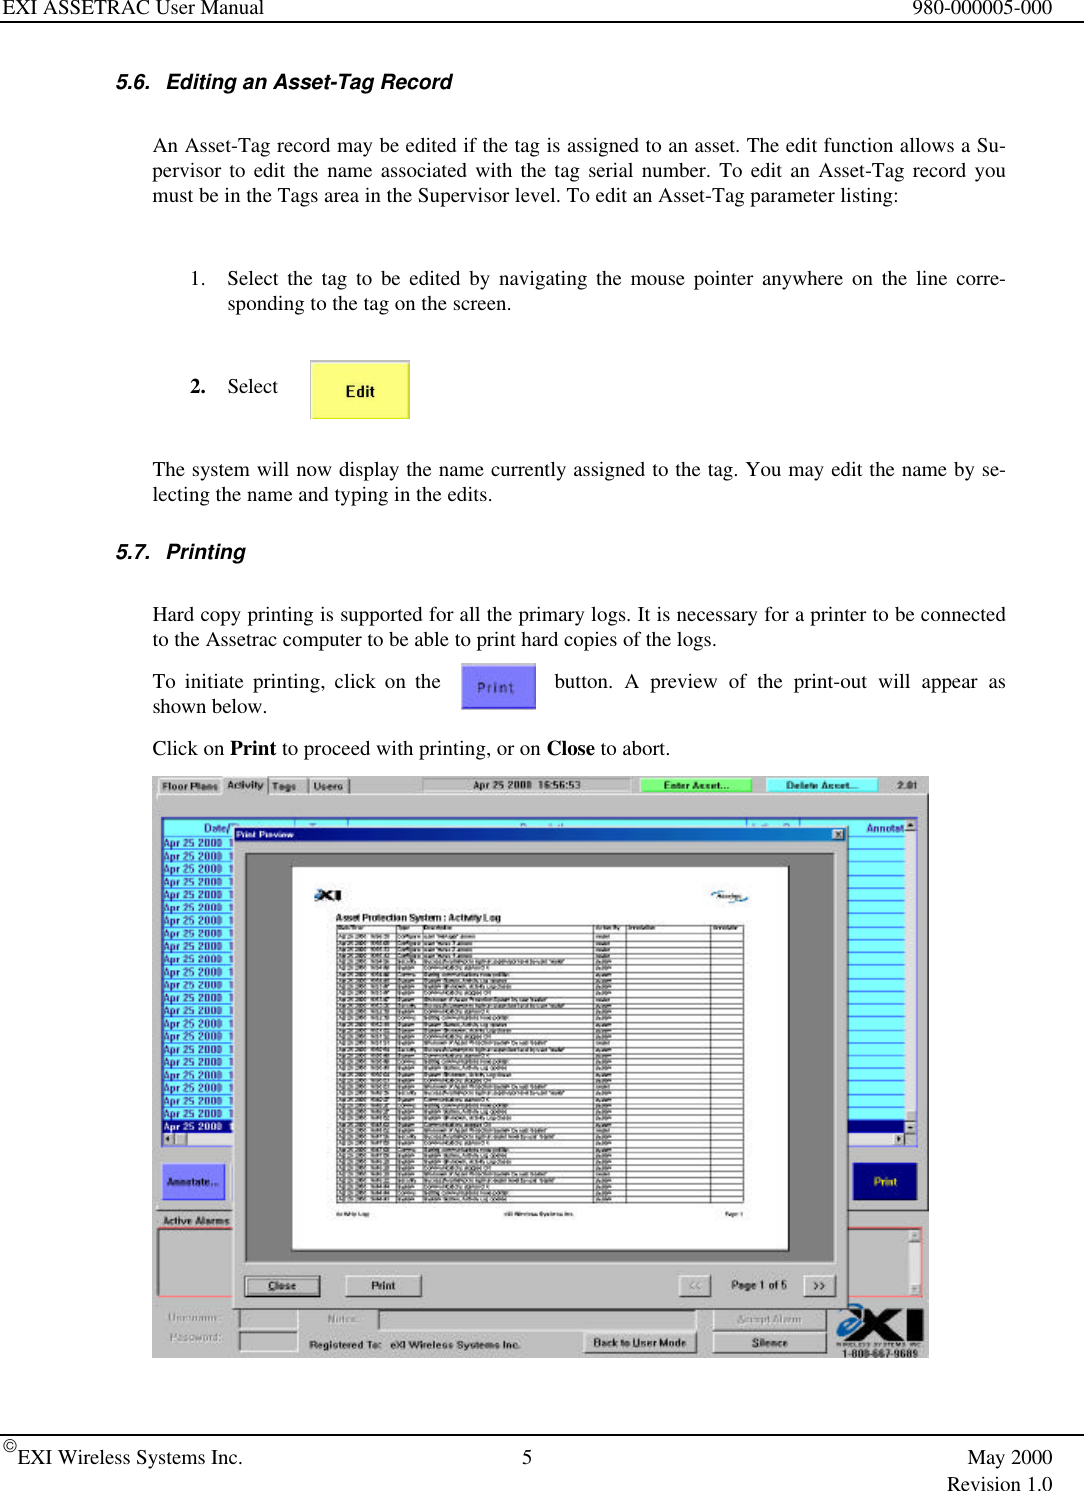 EXI ASSETRAC User Manual 980-000005-000EXI Wireless Systems Inc. 5May 2000Revision 1.05.6. Editing an Asset-Tag RecordAn Asset-Tag record may be edited if the tag is assigned to an asset. The edit function allows a Su-pervisor to edit the name associated with the tag serial number. To edit an Asset-Tag record youmust be in the Tags area in the Supervisor level. To edit an Asset-Tag parameter listing:1. Select the tag to be edited by navigating the mouse pointer anywhere on the line corre-sponding to the tag on the screen.2. SelectThe system will now display the name currently assigned to the tag. You may edit the name by se-lecting the name and typing in the edits.5.7. PrintingHard copy printing is supported for all the primary logs. It is necessary for a printer to be connectedto the Assetrac computer to be able to print hard copies of the logs.To initiate printing, click on the button. A preview of the print-out will appear asshown below.Click on Print to proceed with printing, or on Close to abort.